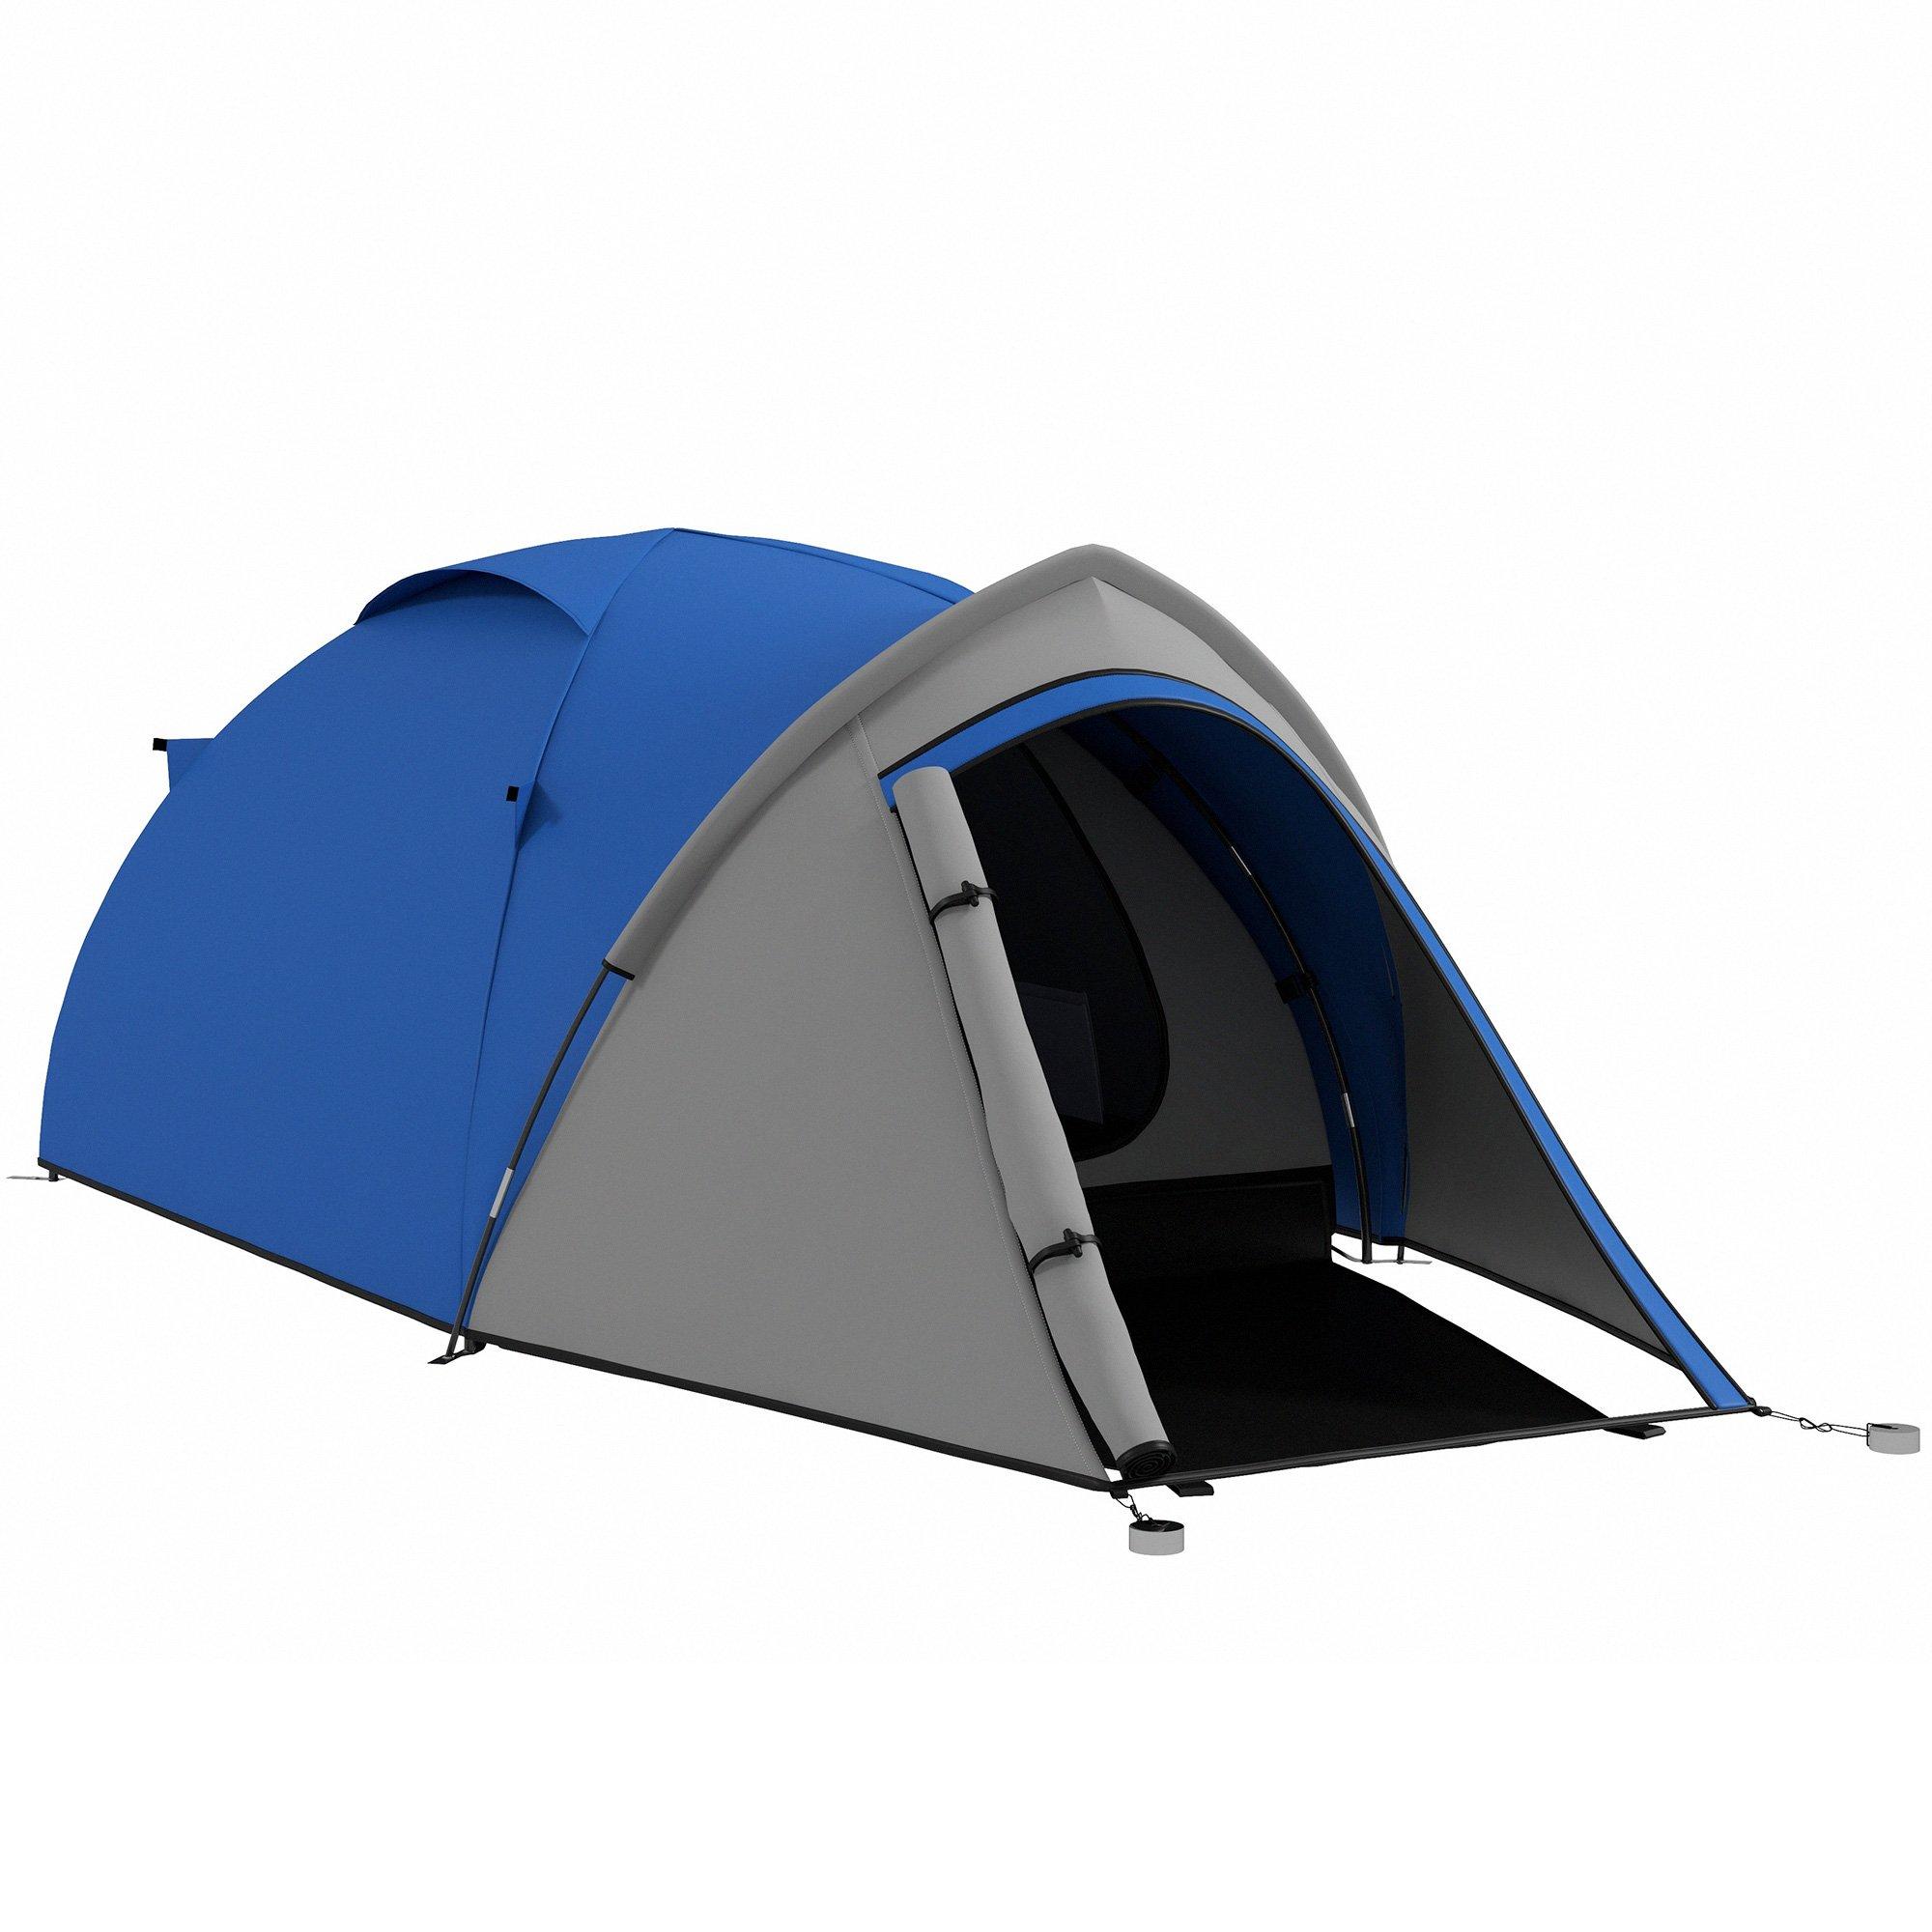 Two-Man Camping Tent with Weatherproof Shell Large Windows